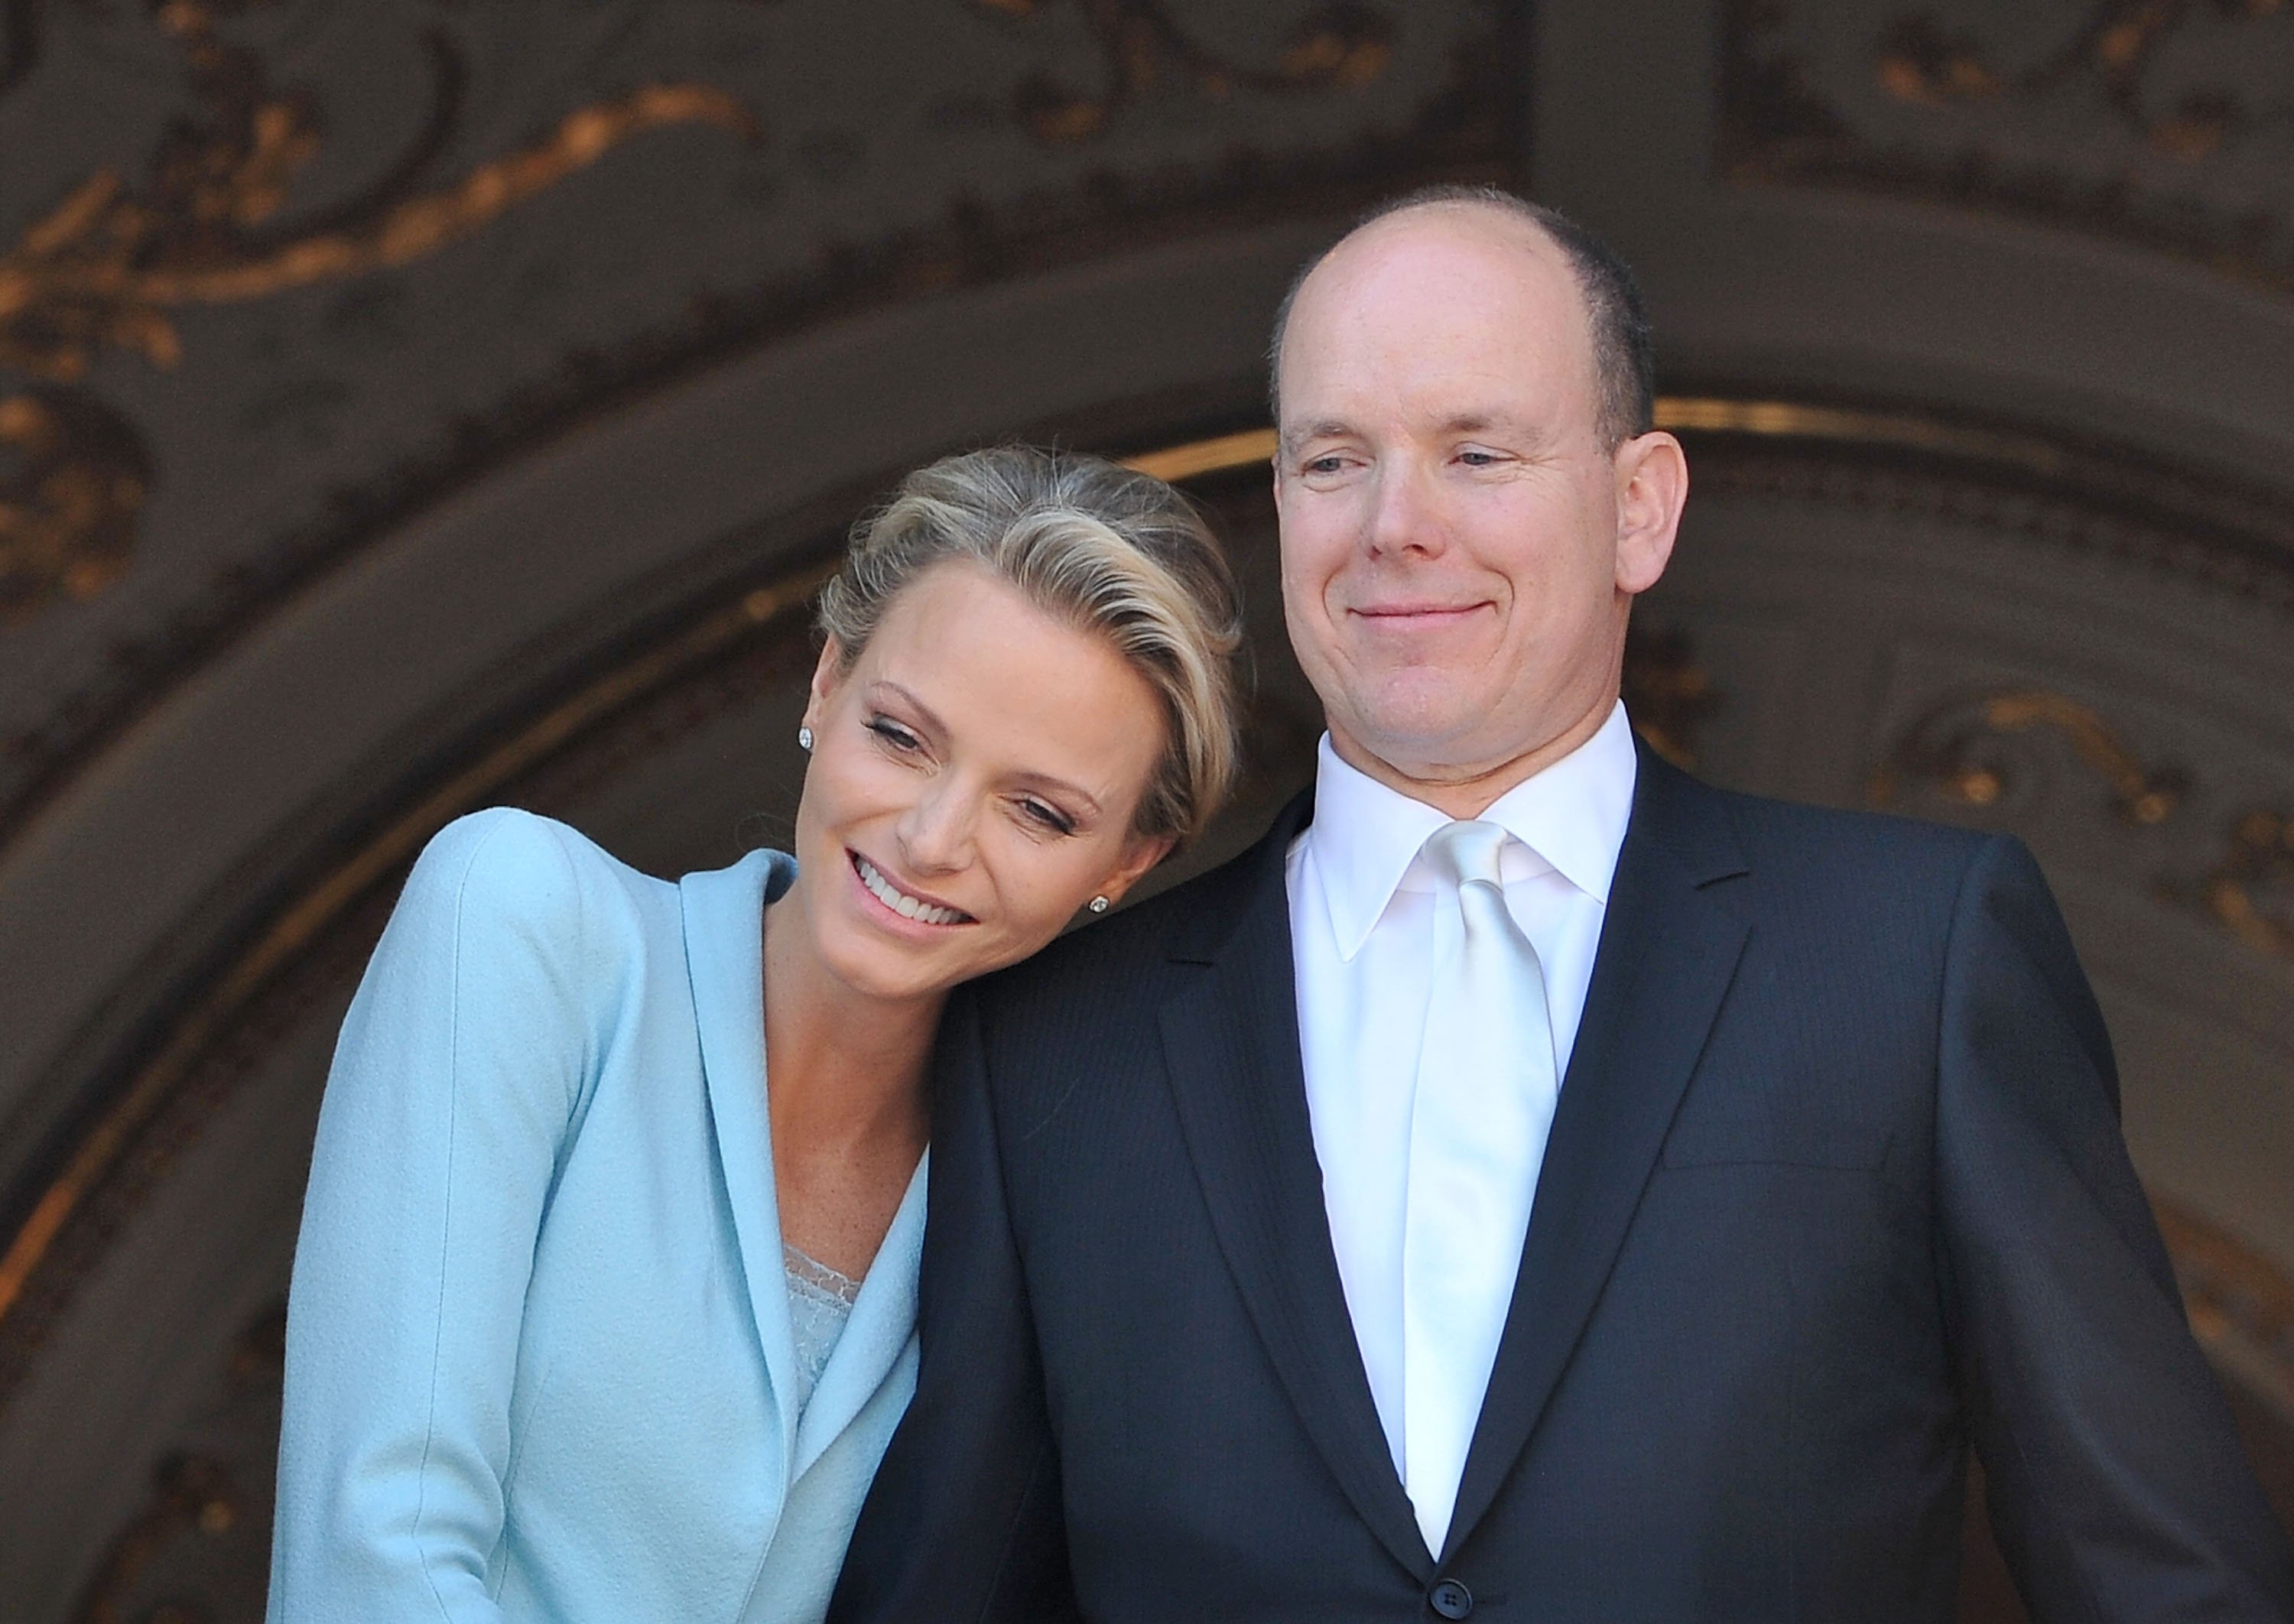 Princess Charlene of Monaco and Prince Albert II of Monaco after their civil ceremony at the Prince's Palace on July 1, 2011 in Monaco. | Source: Getty Images